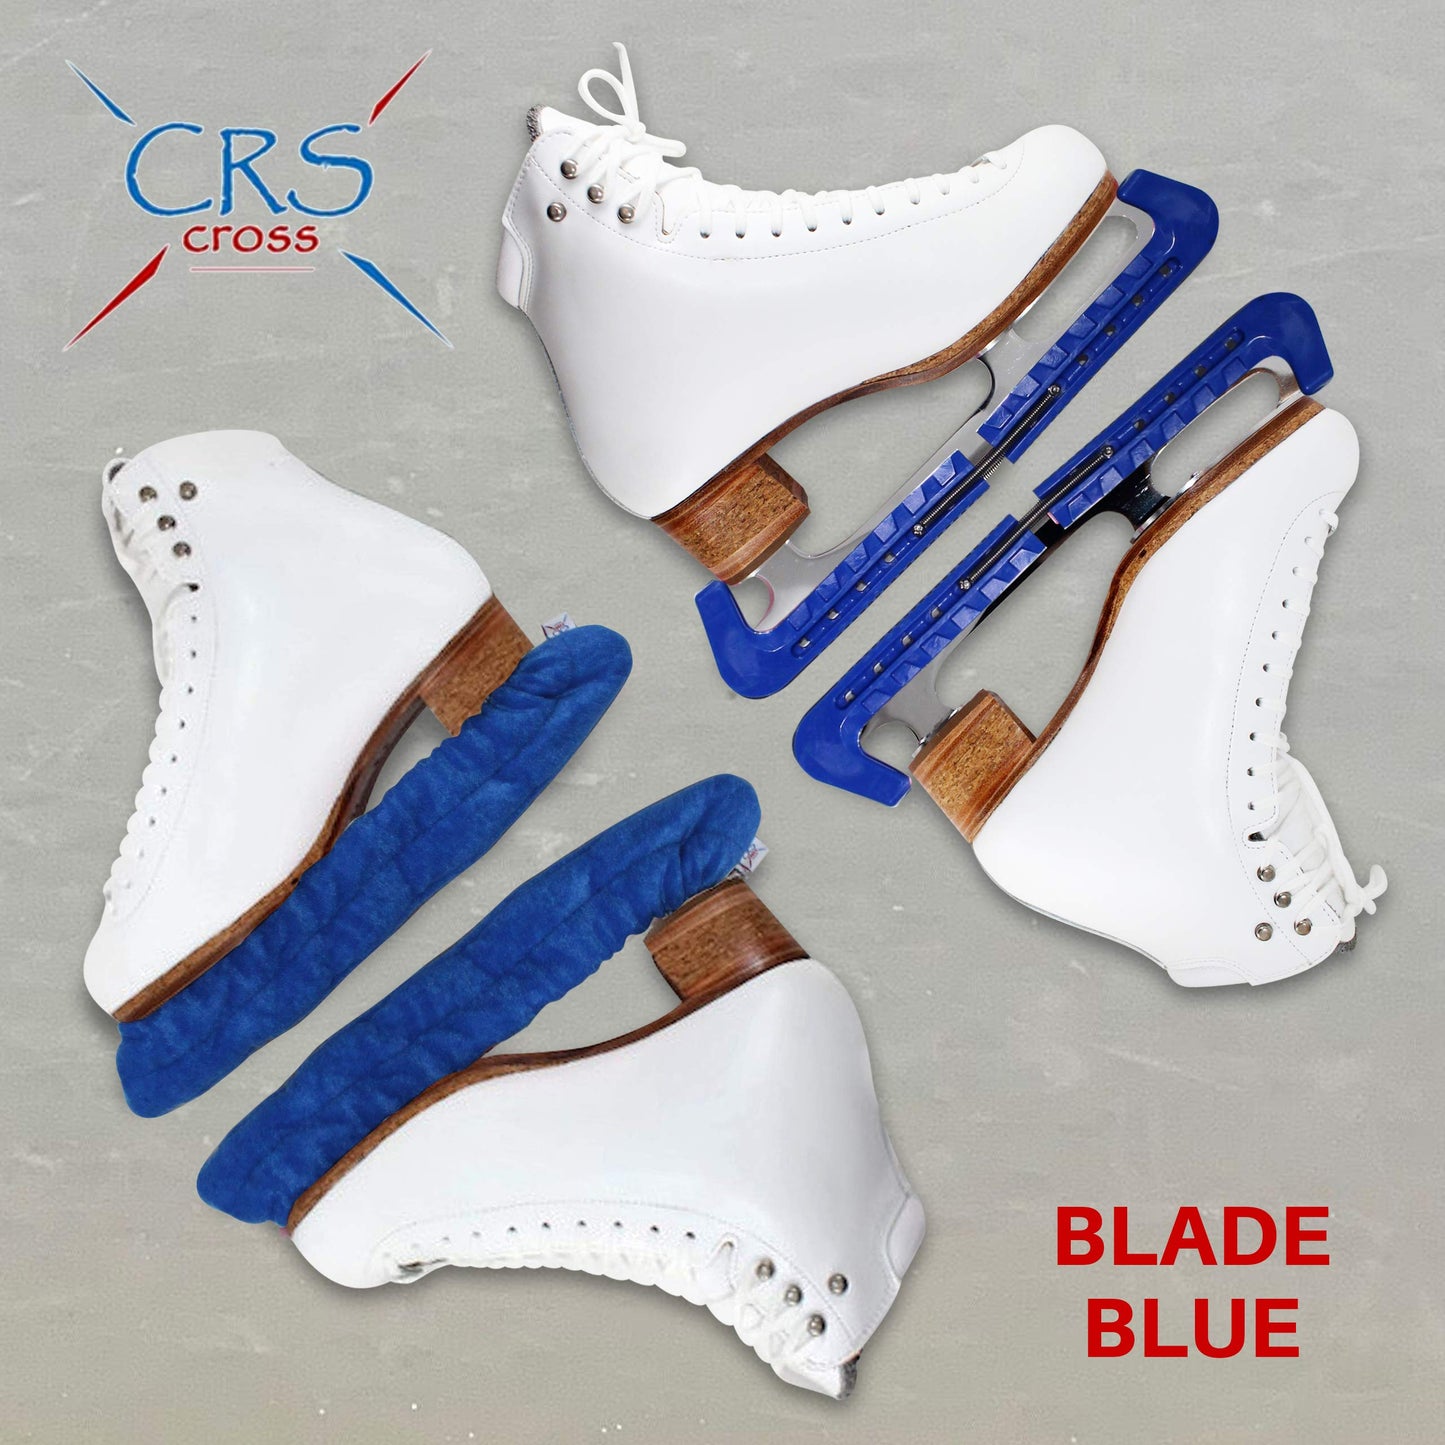 CRS Cross Skate Guards, Soakers & Towel Gift Set - Ice Skating Guards and Soft Skate Blade Covers for Figure Skating or Hockey